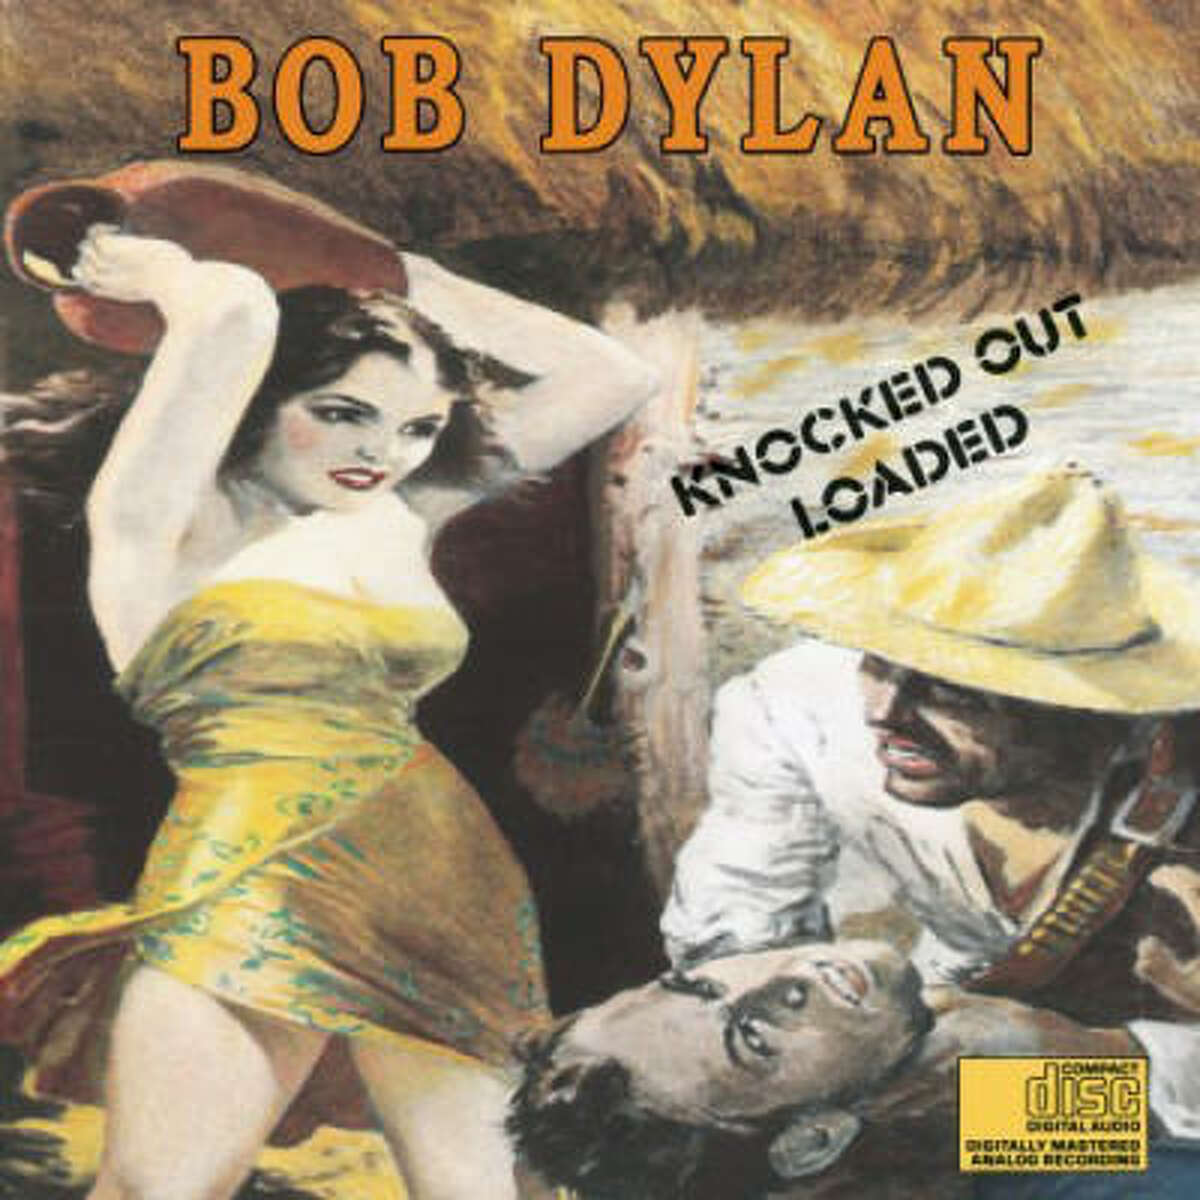 The cover of Bob Dylan's Knocked Out Loaded.